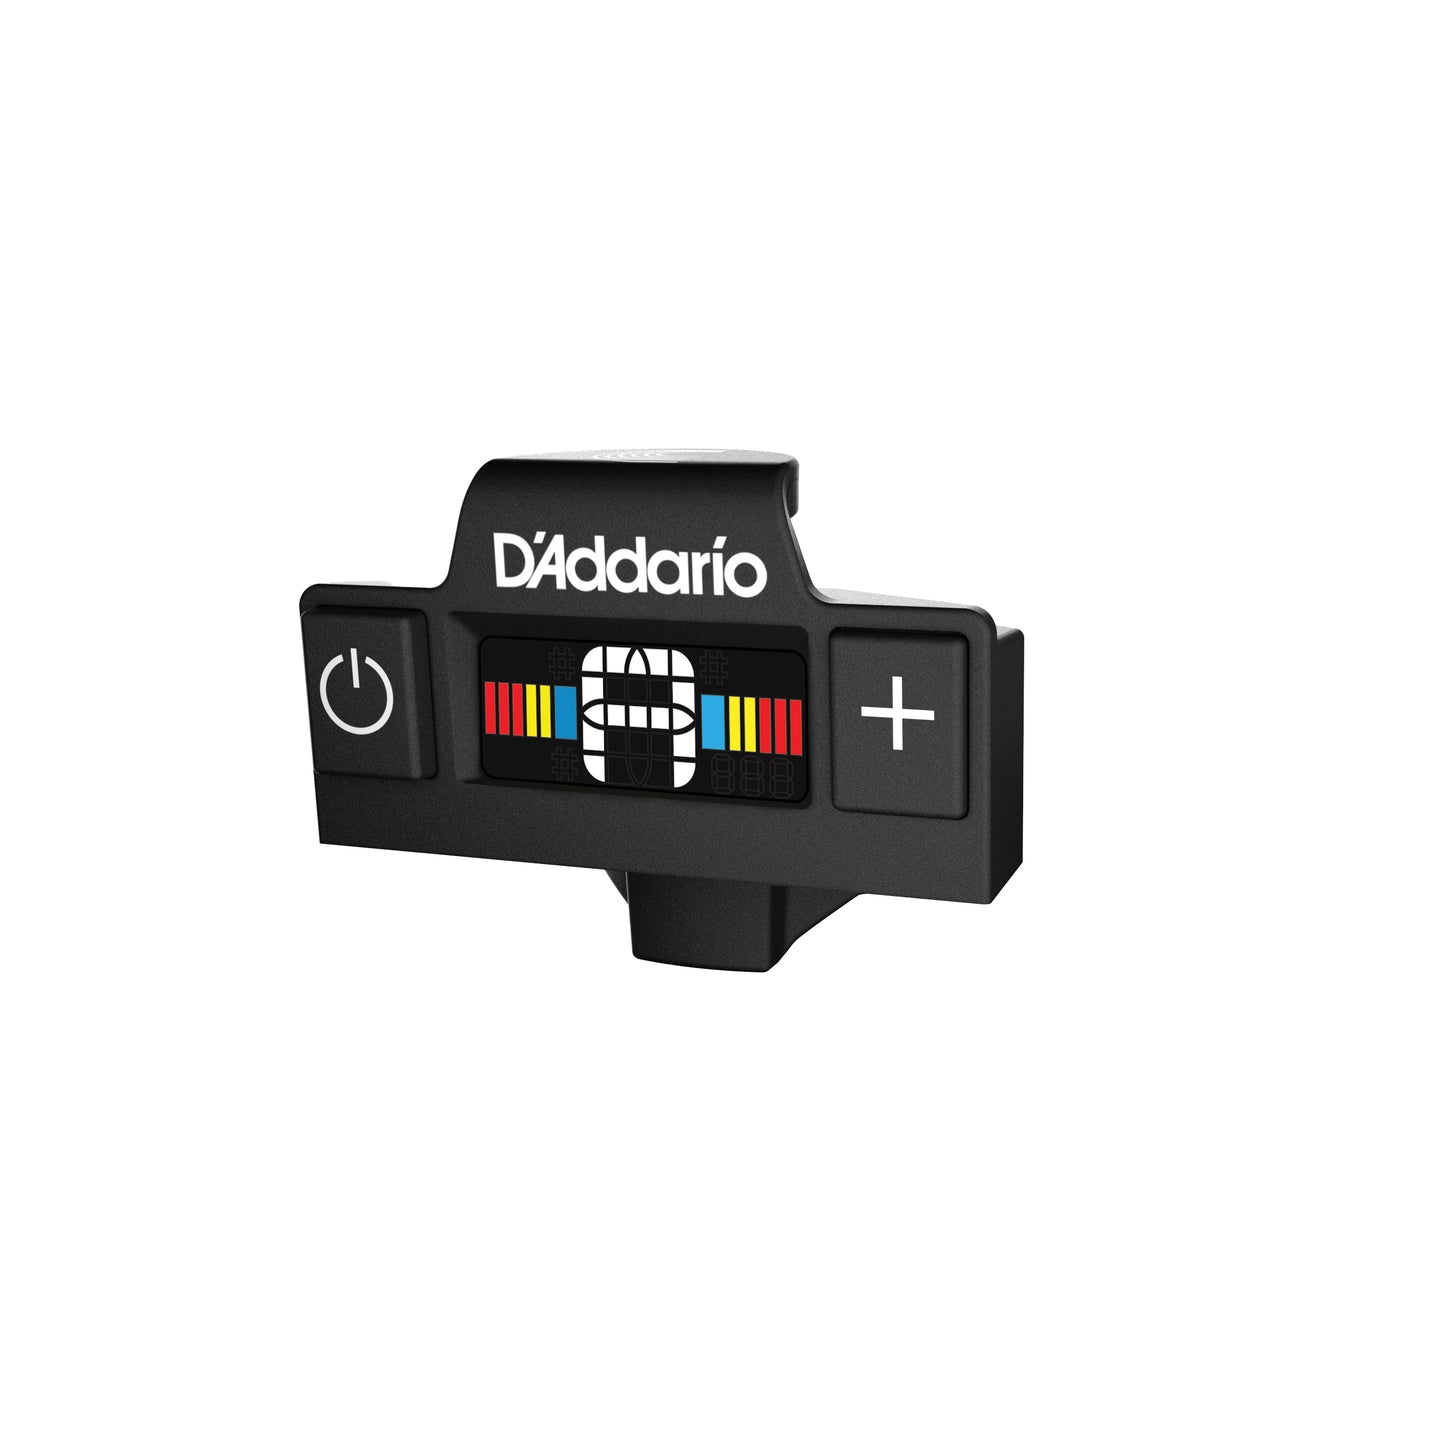 Front of D'Addario Micro Soundhole Tuner